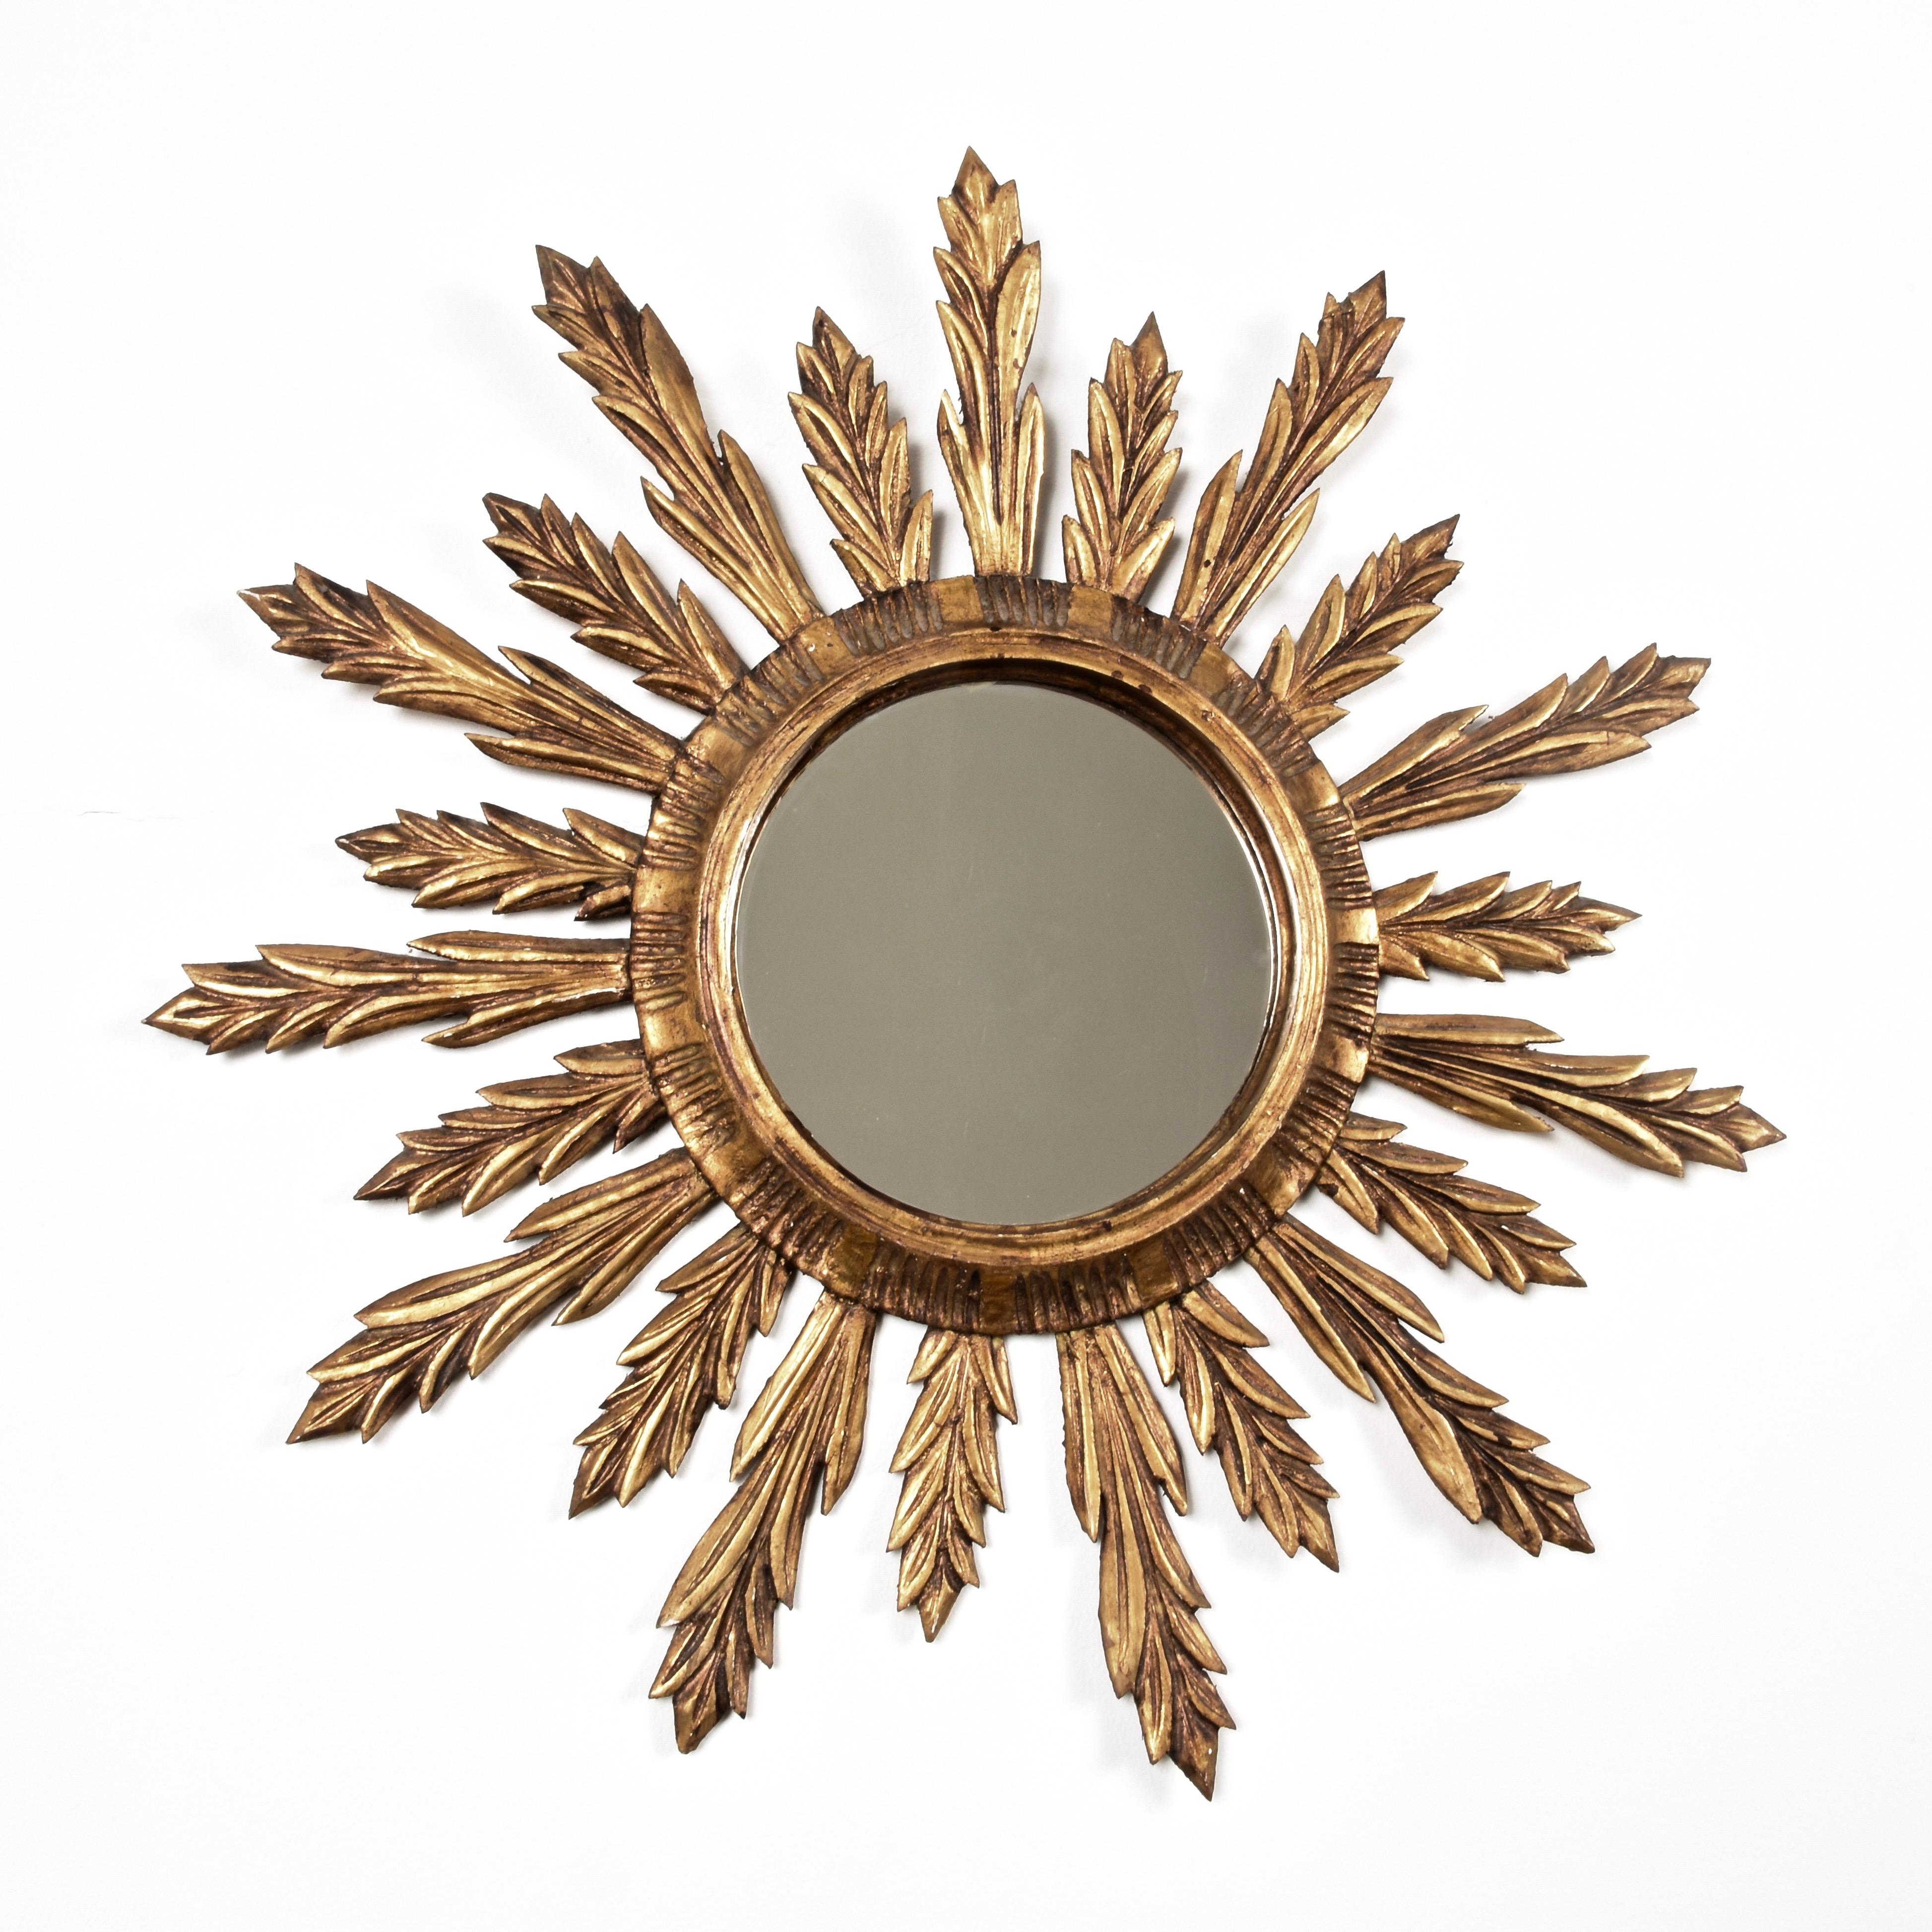 Wonderful Mid-Century Modern gilded wood sunburst wall mirror. This amazing mirror was produced in France during 1950s.

The big and small rays of the sun are just marvellous, as they seem palm branches.

A fantastic and bright item, that will